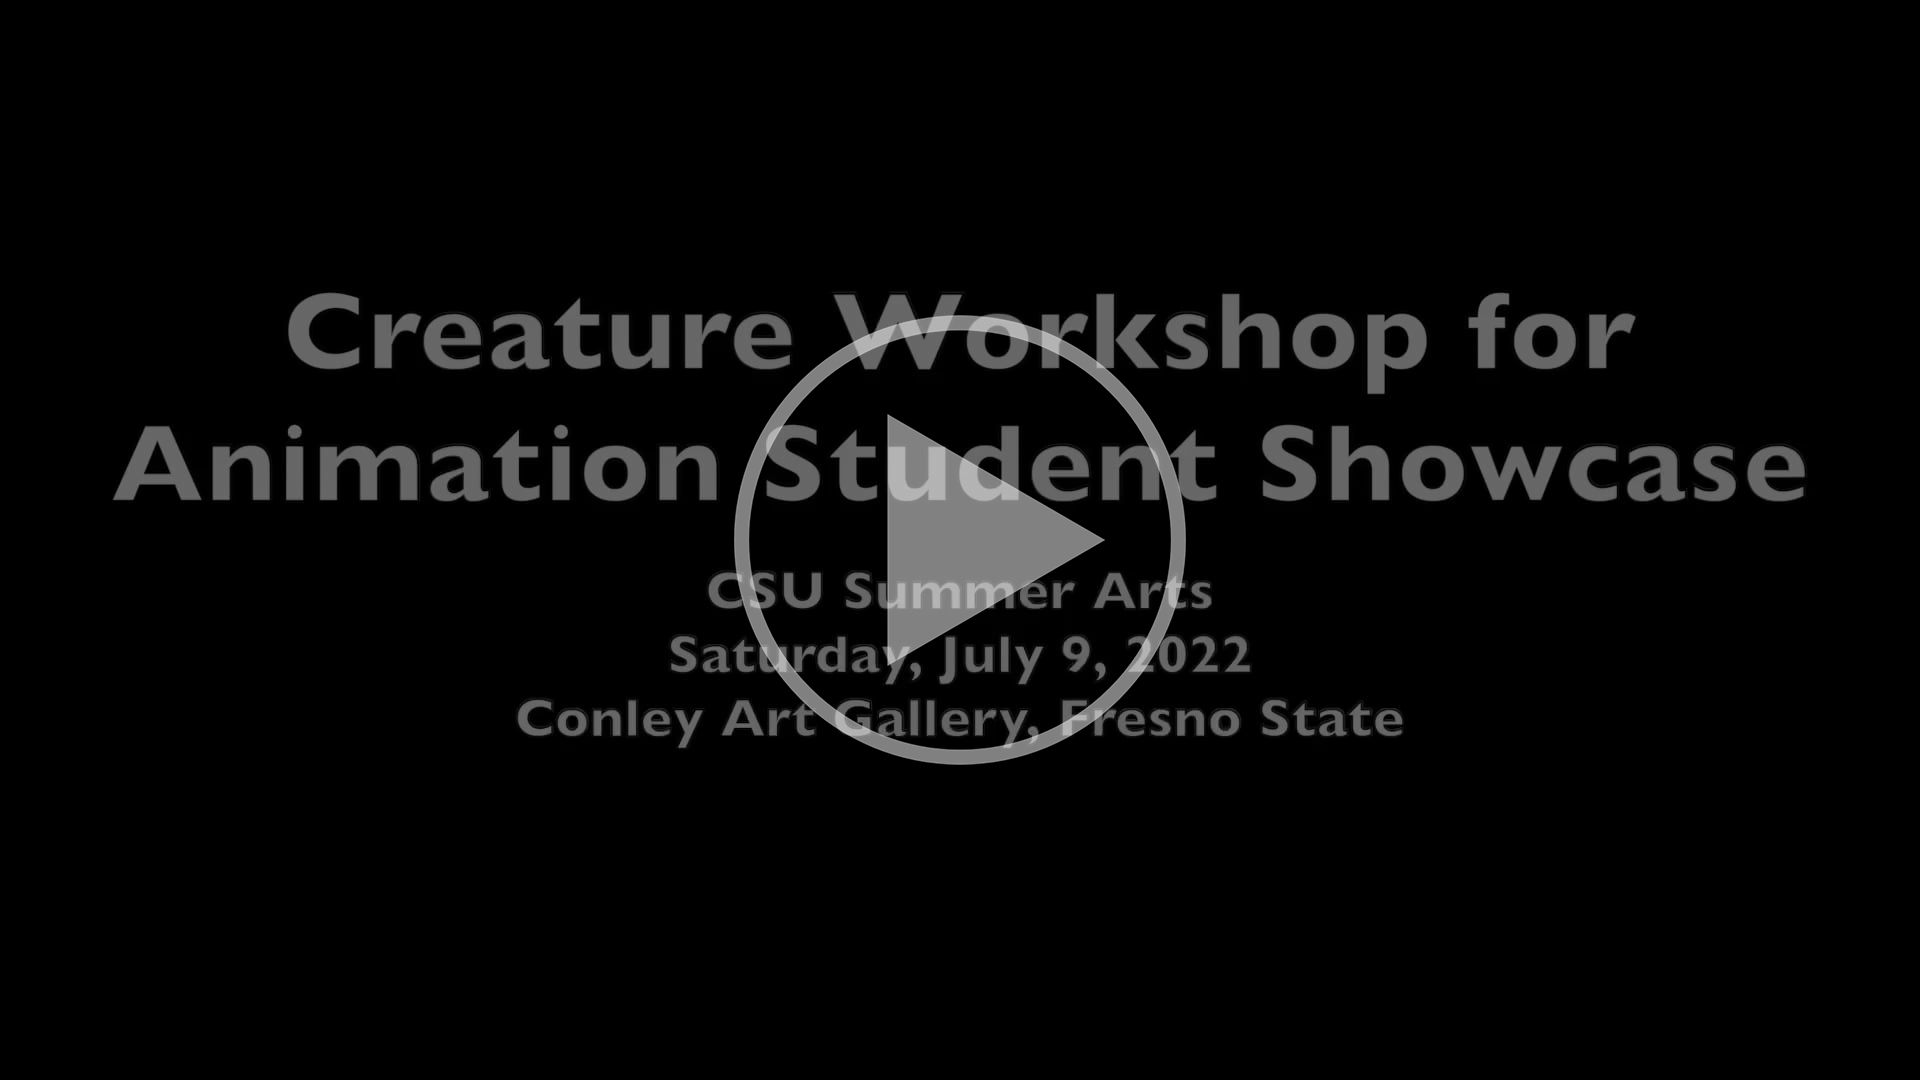 Play the 'Creature Workshop for Animation Student Showcase Exhibit'